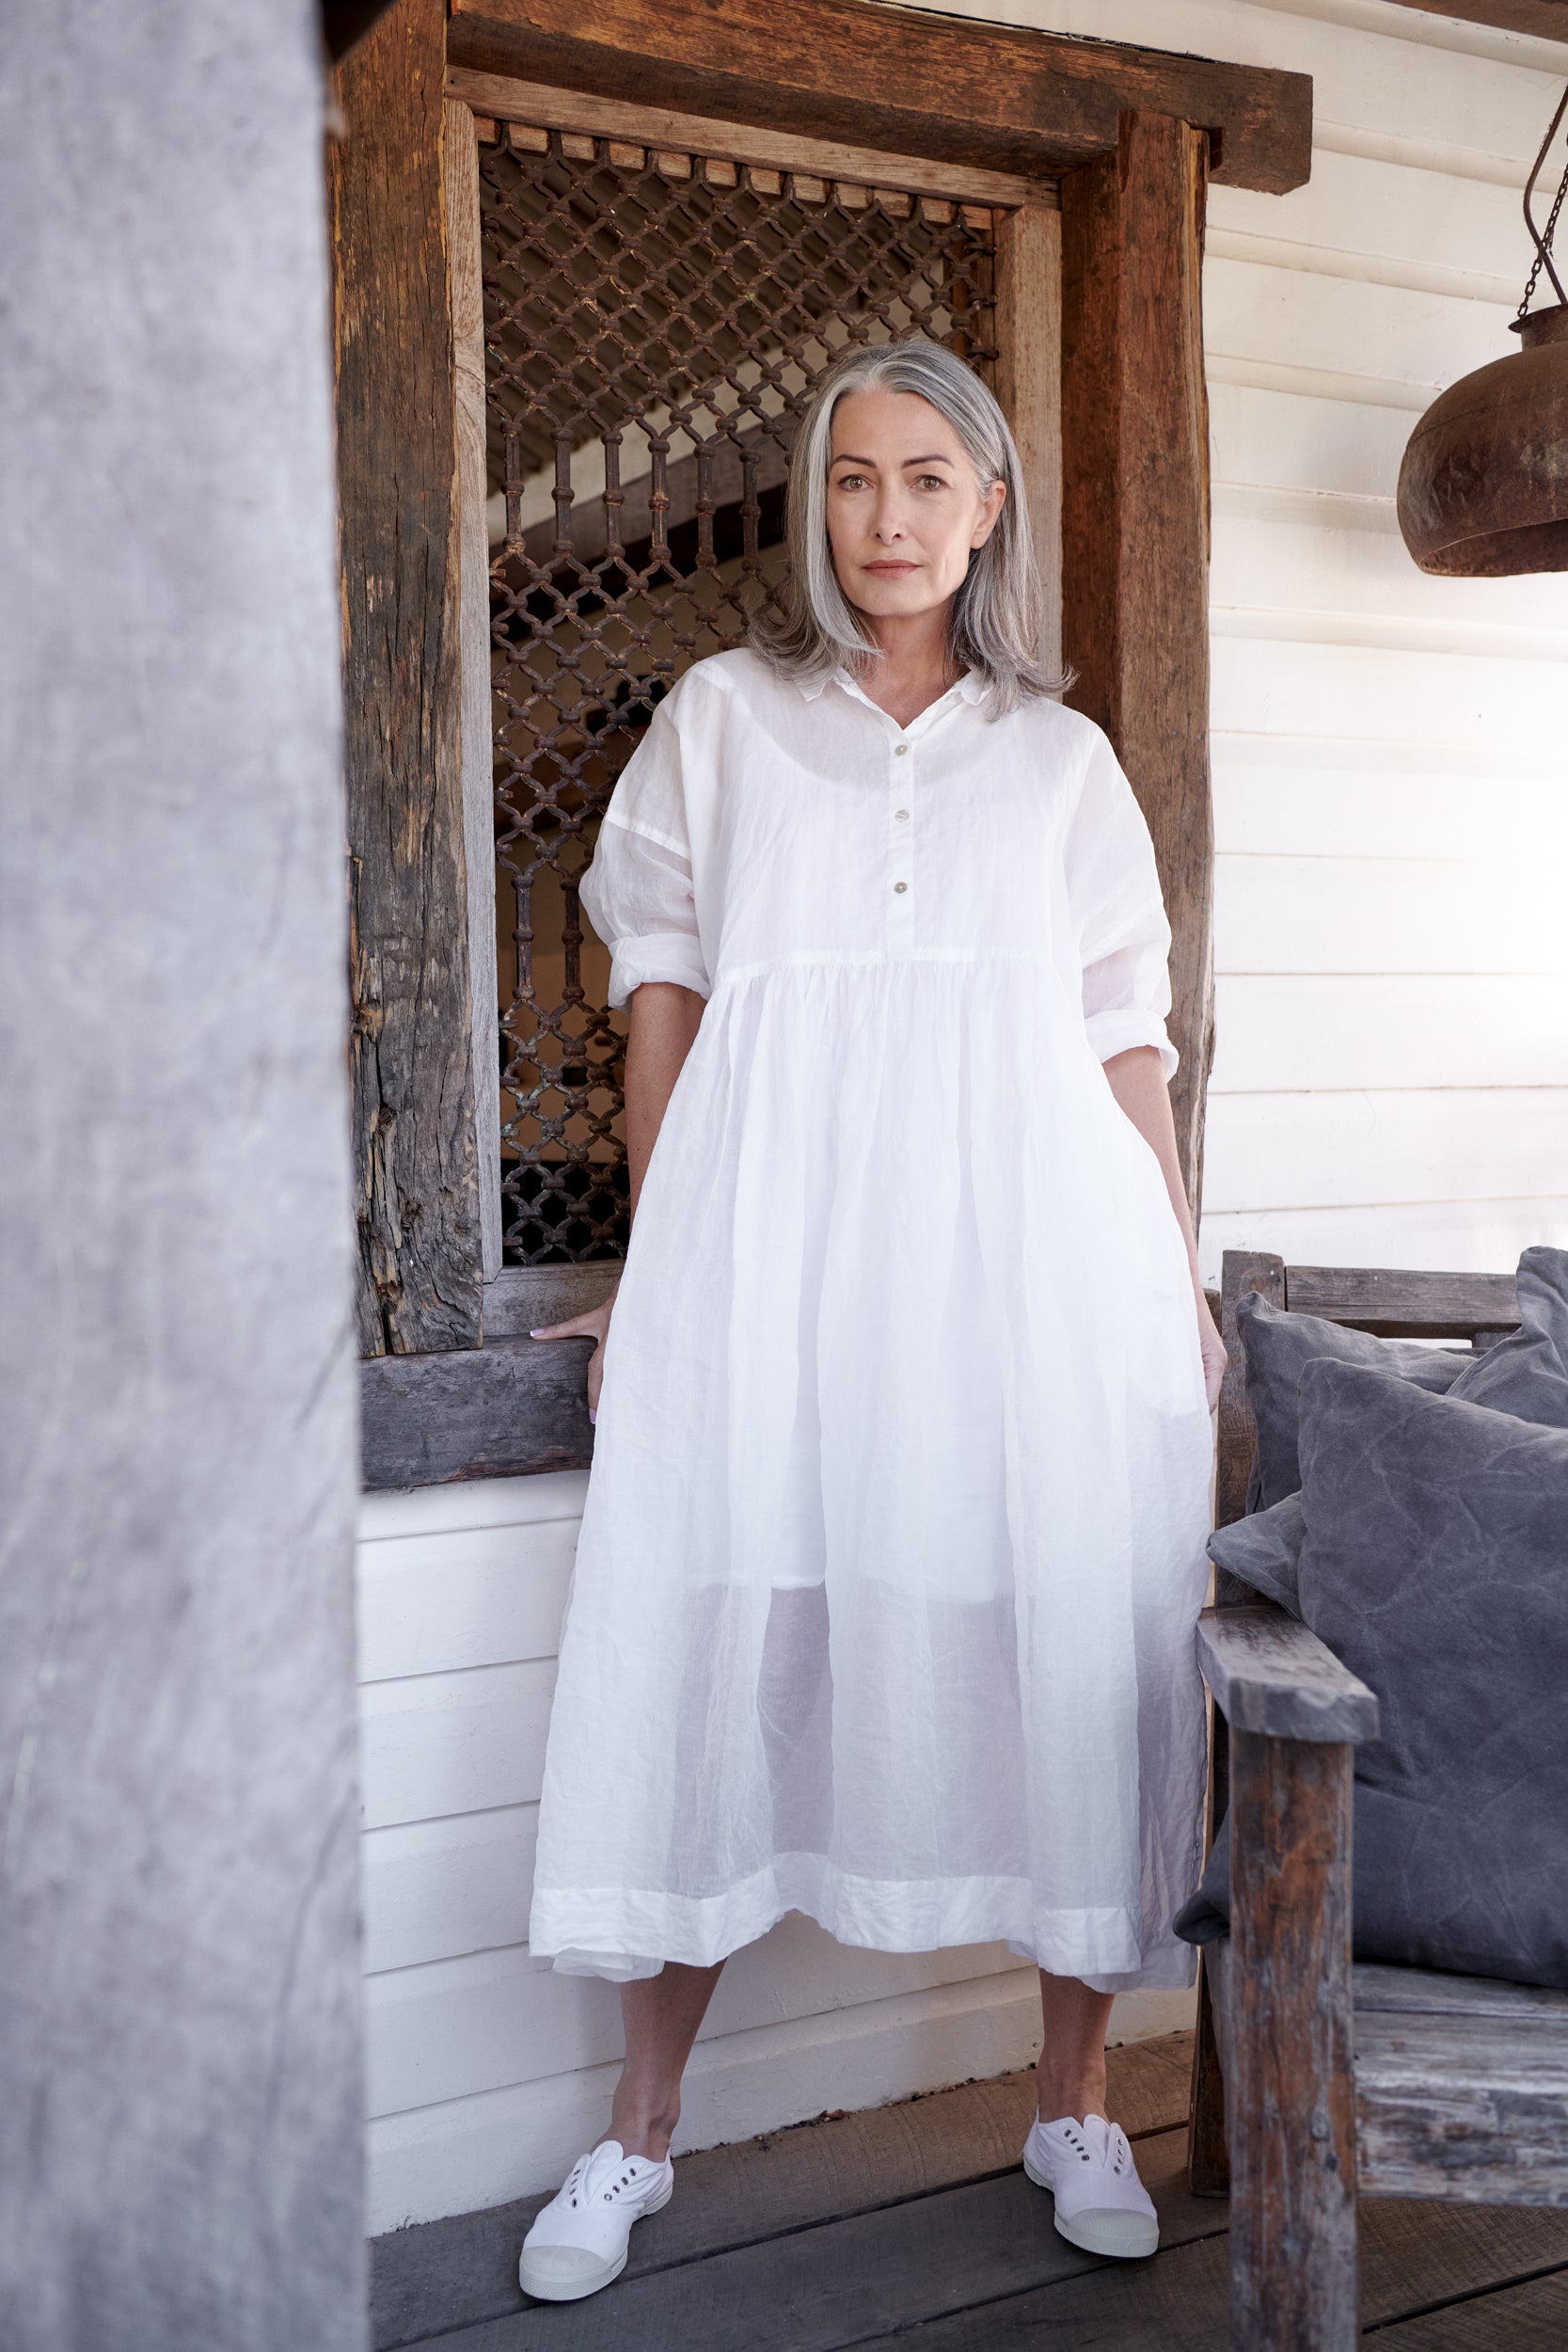 A MegbyDesign model is wearing a long white cotton dress with a collared neck and rolled sleeves